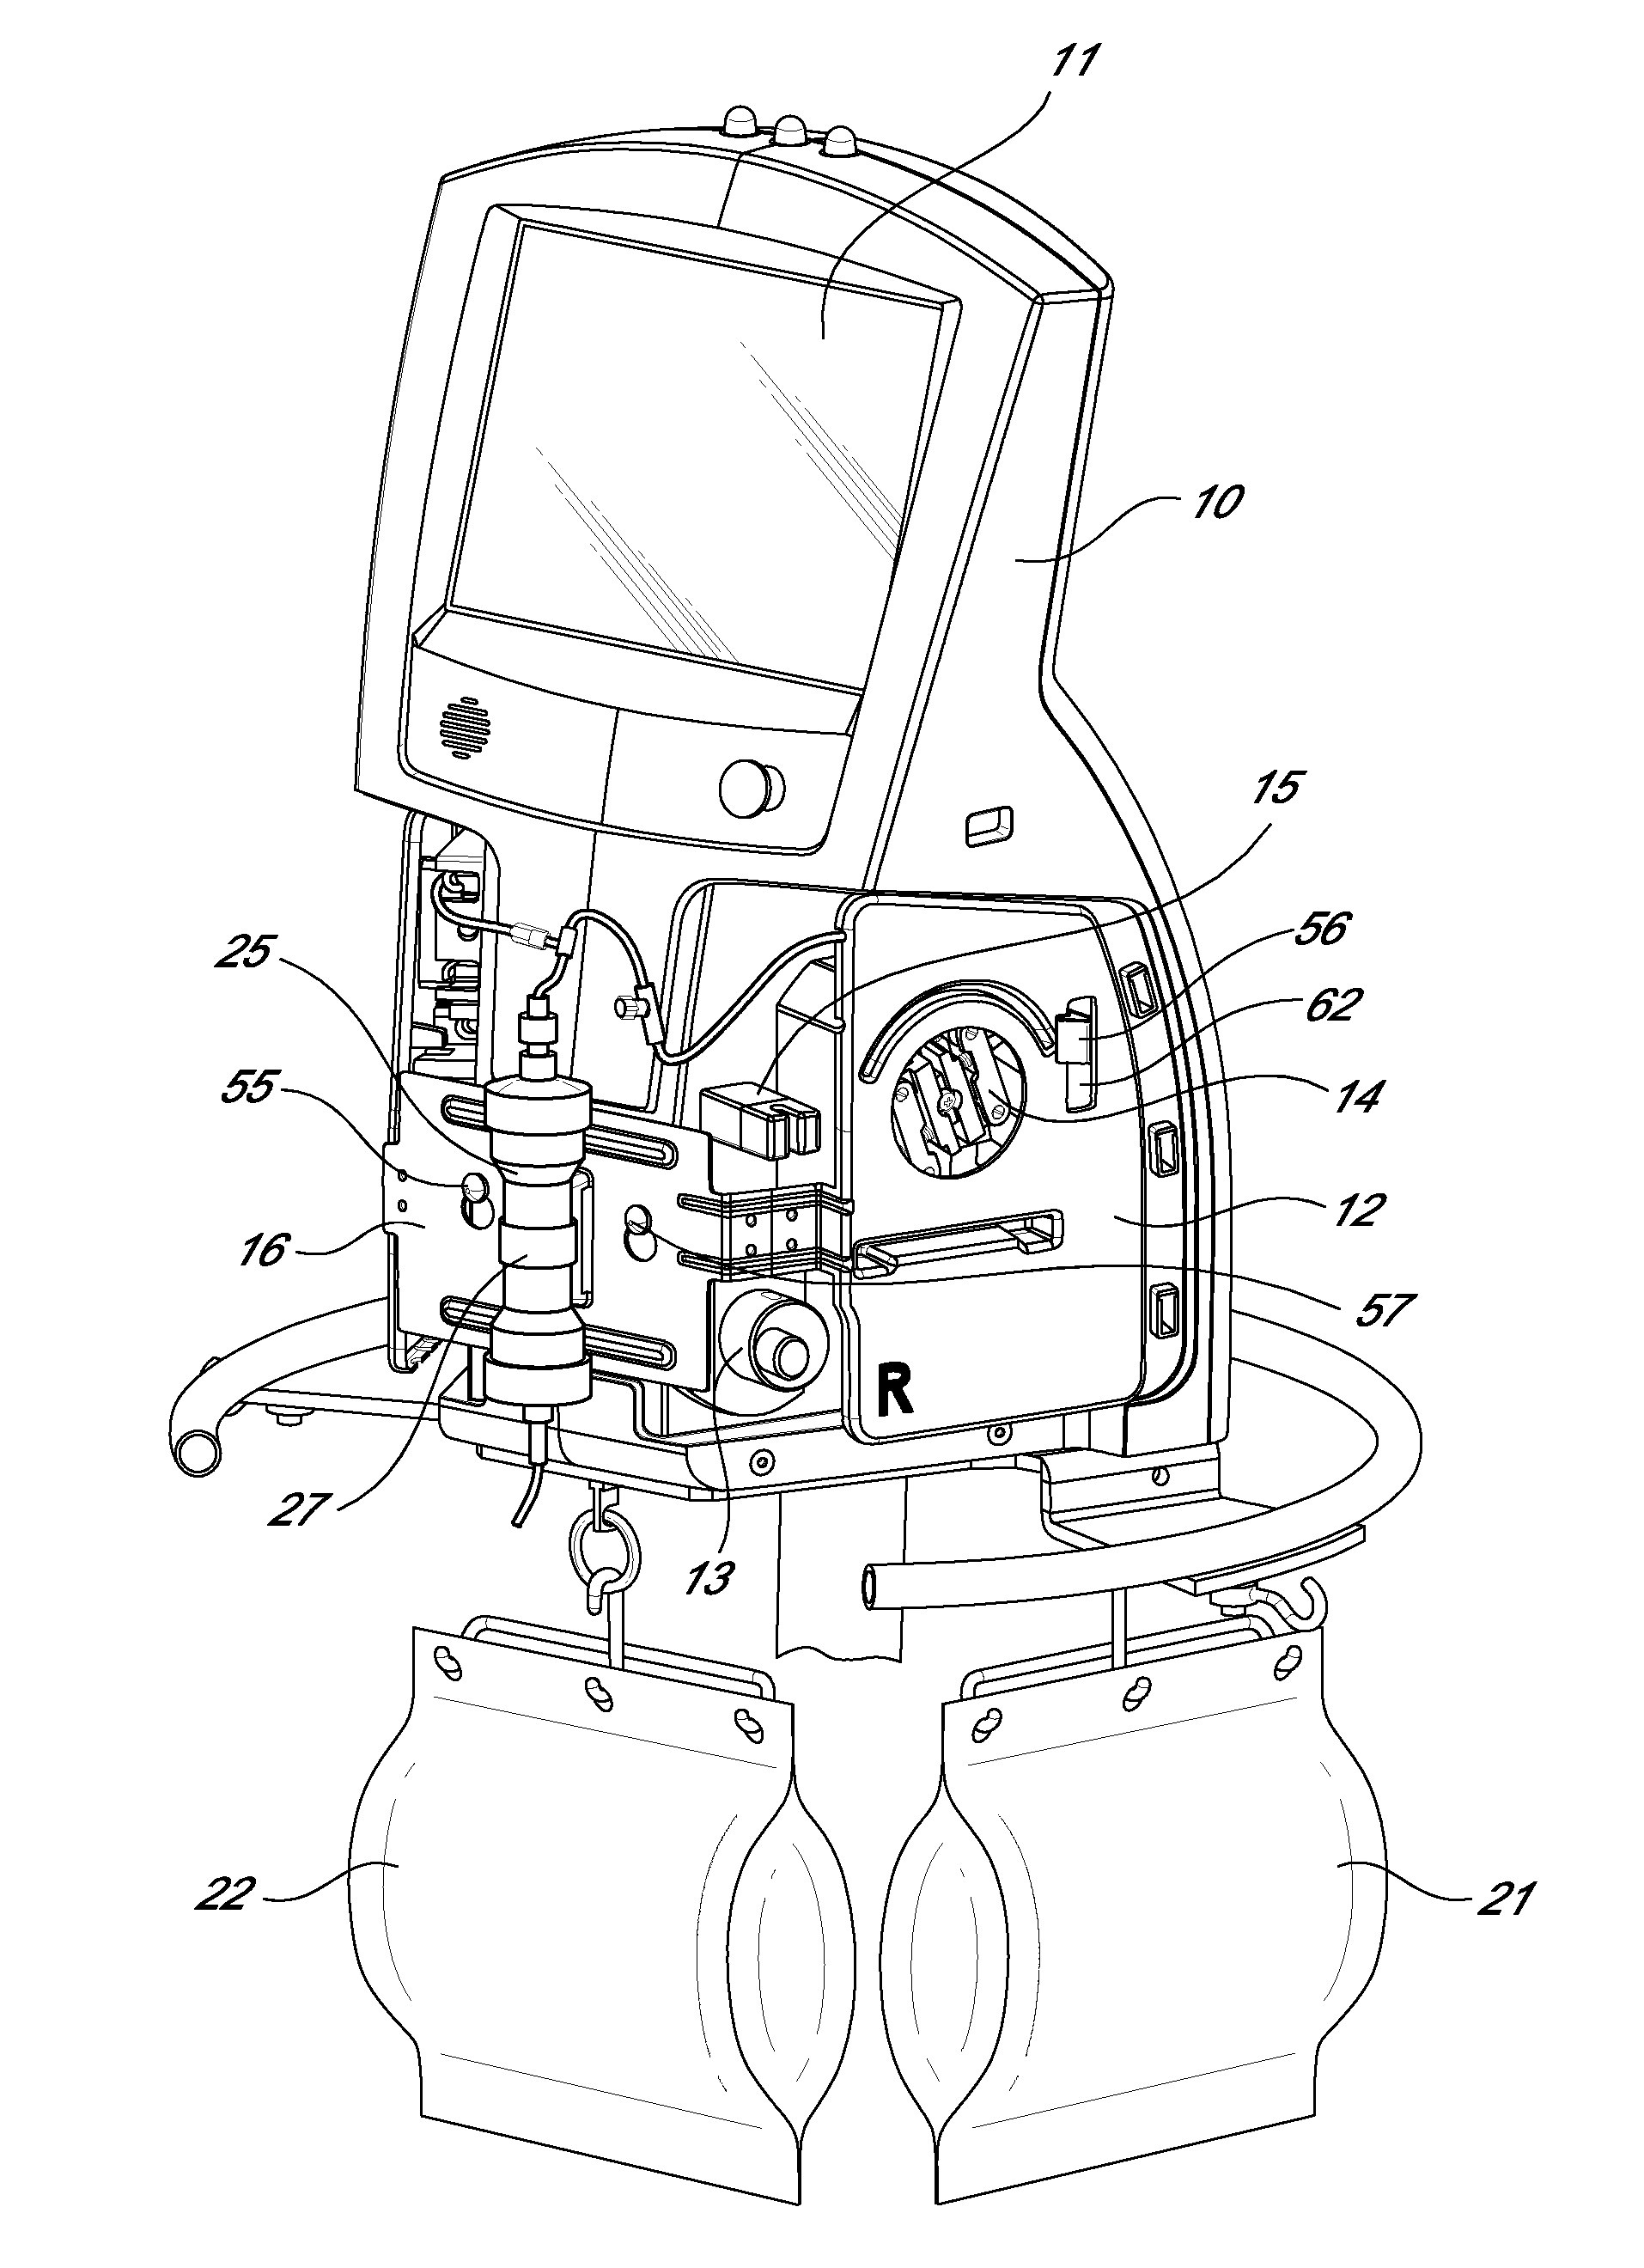 Modular hemofiltration apparatus and method for carrying out neonatal and pediatric crrt